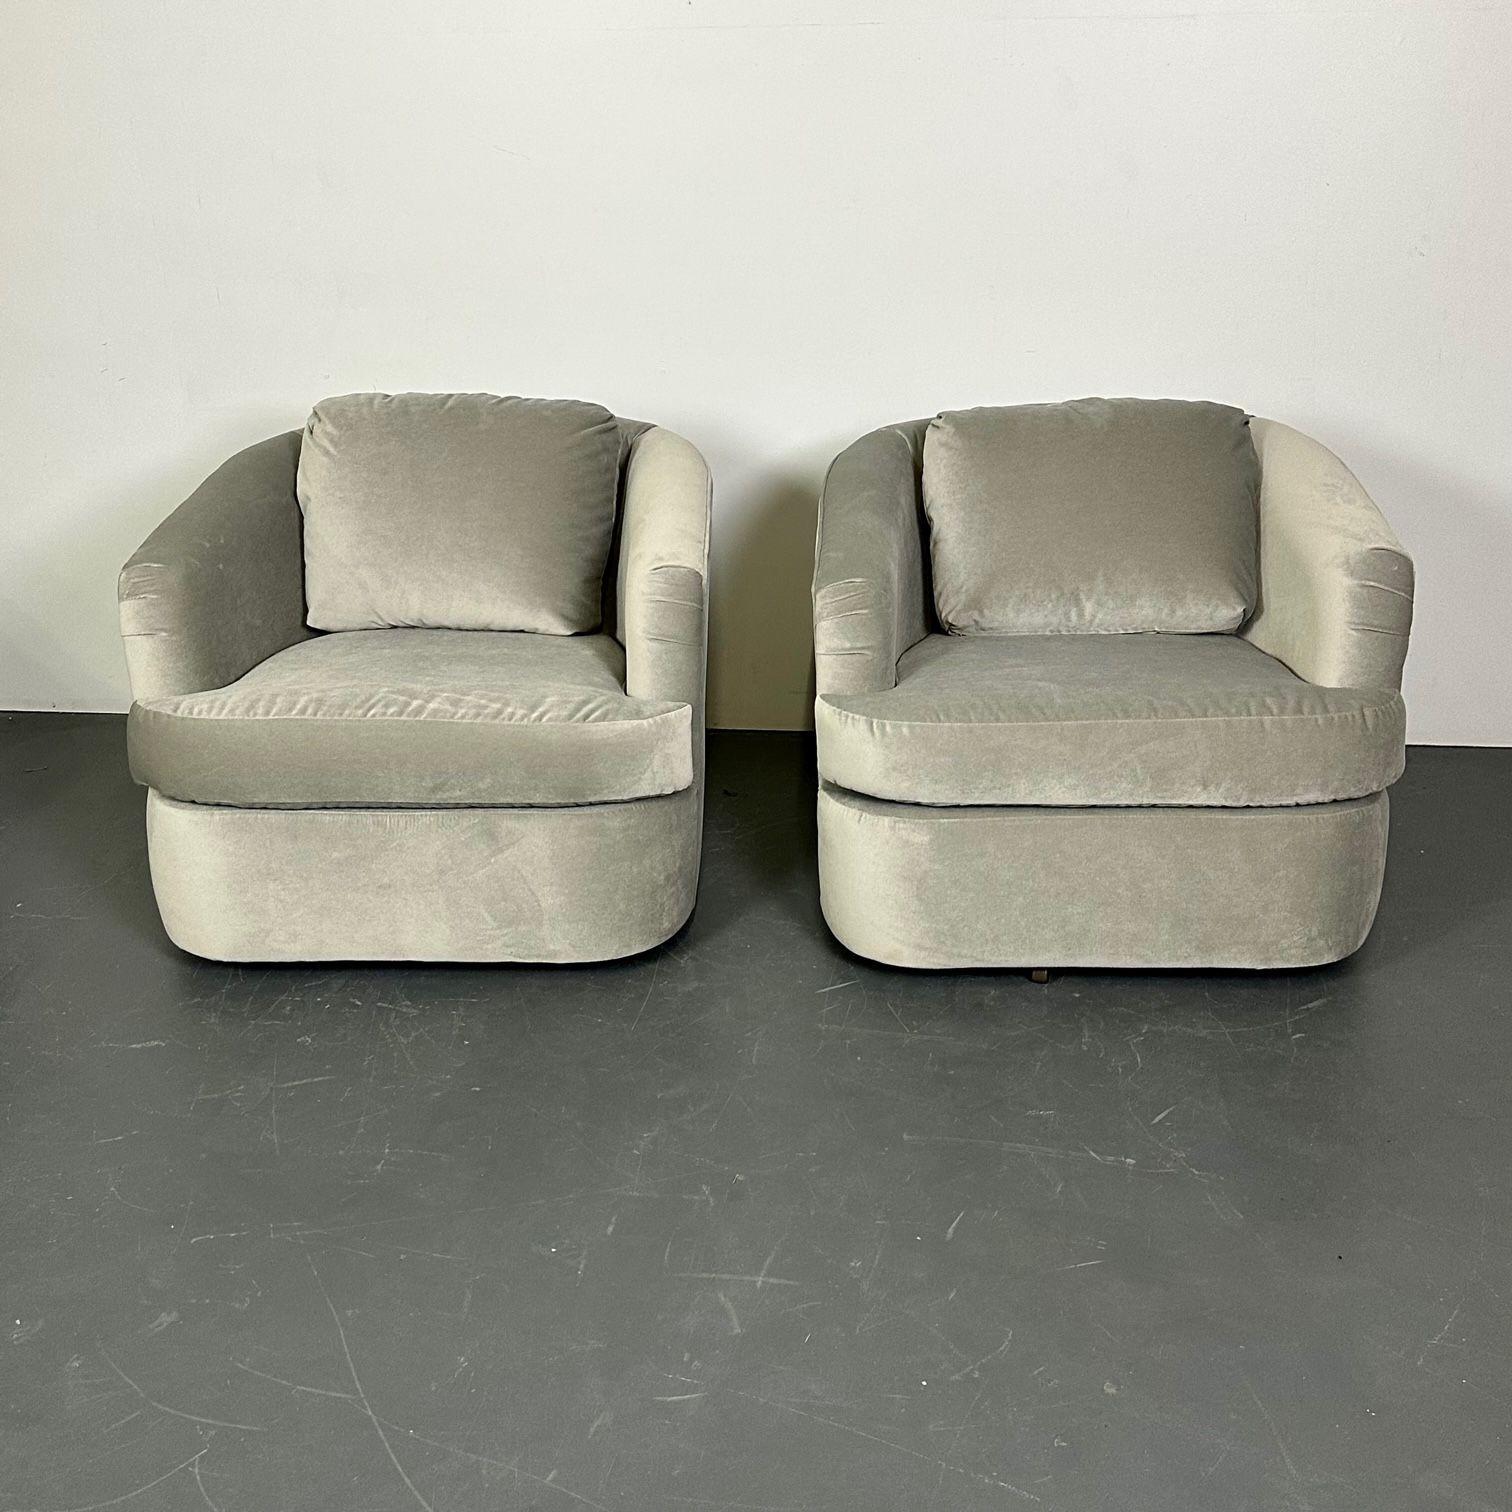 Pair of Velvet Mid-Century Modern Milo Baughman style swivel / lounge chairs
 
Each having a thick comfortable cushion recently recovered having a barrel back form and shape on swivel bases in a new grayish velour upholstery in the manner of Milo